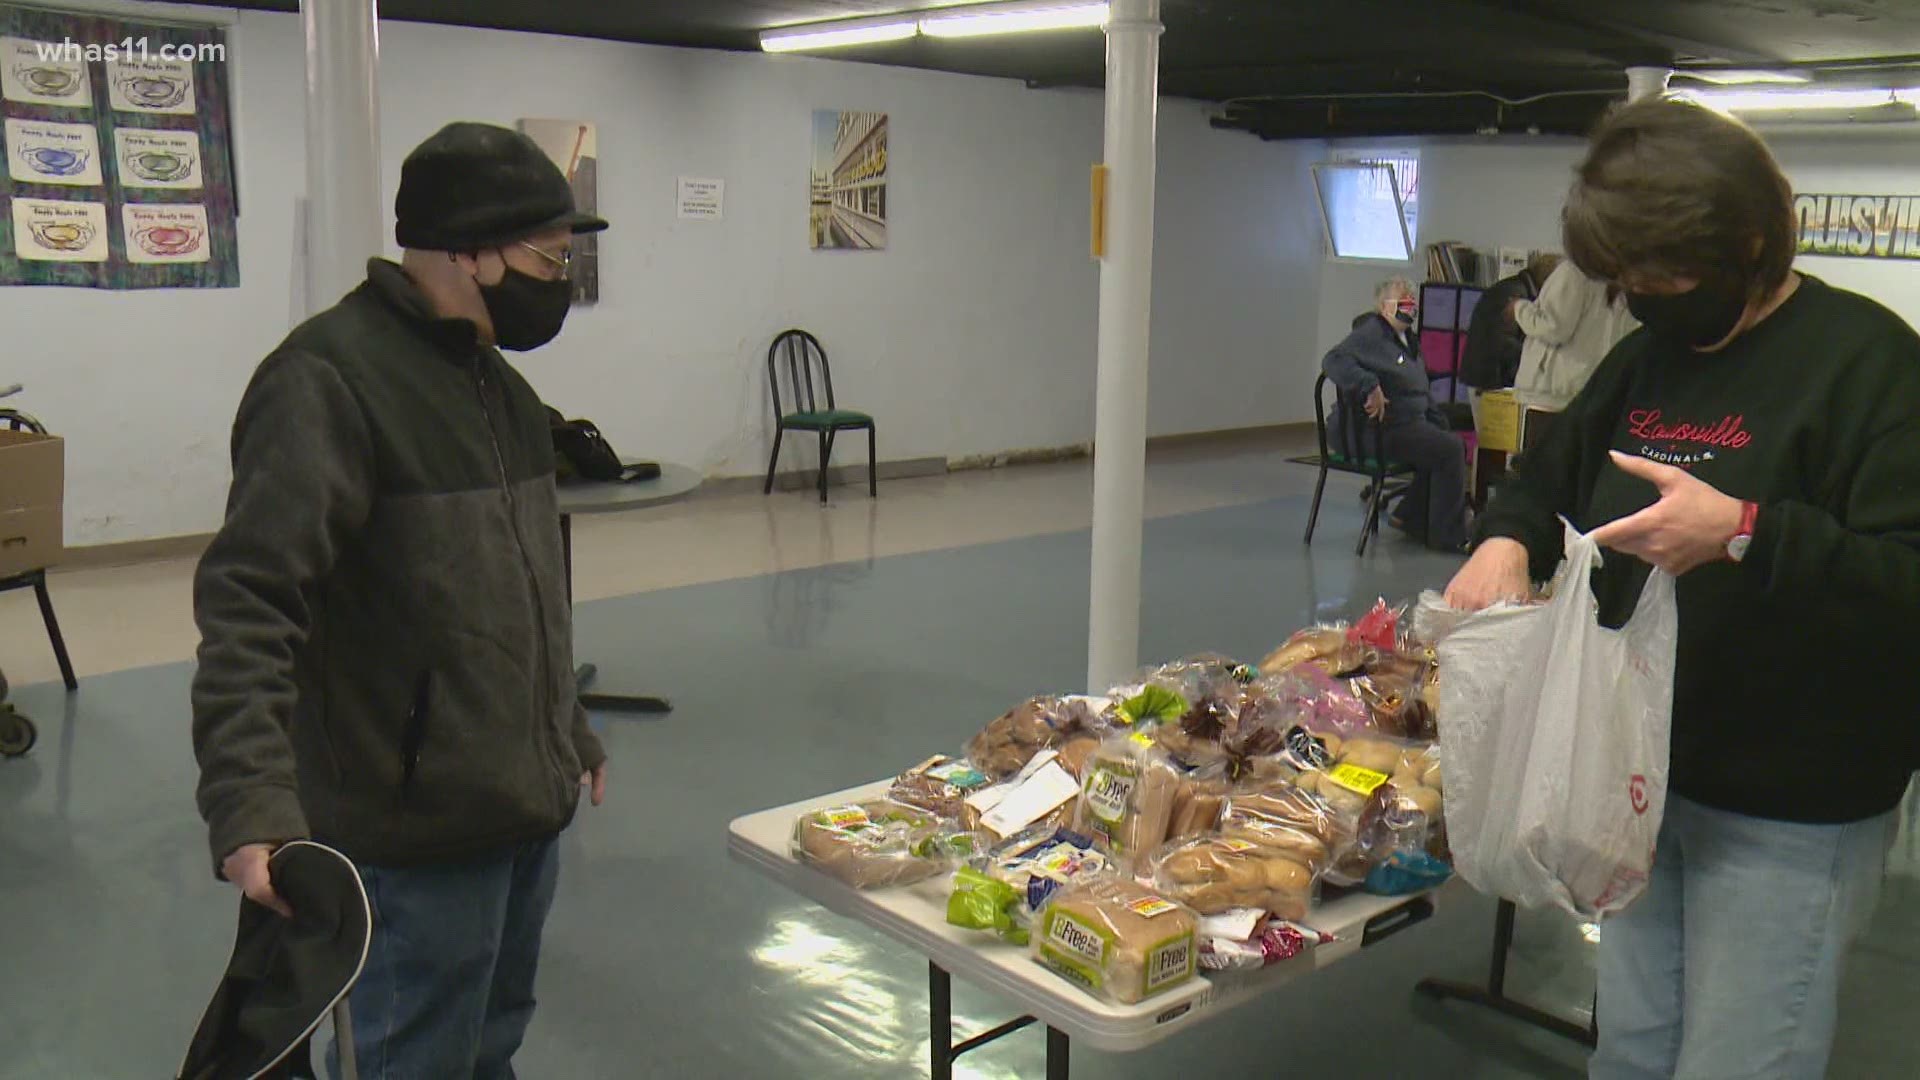 FOCUS takes us inside Highlands Community Ministries, a local food pantry, showing us the geography of food insecurity in Kentucky and Indiana.